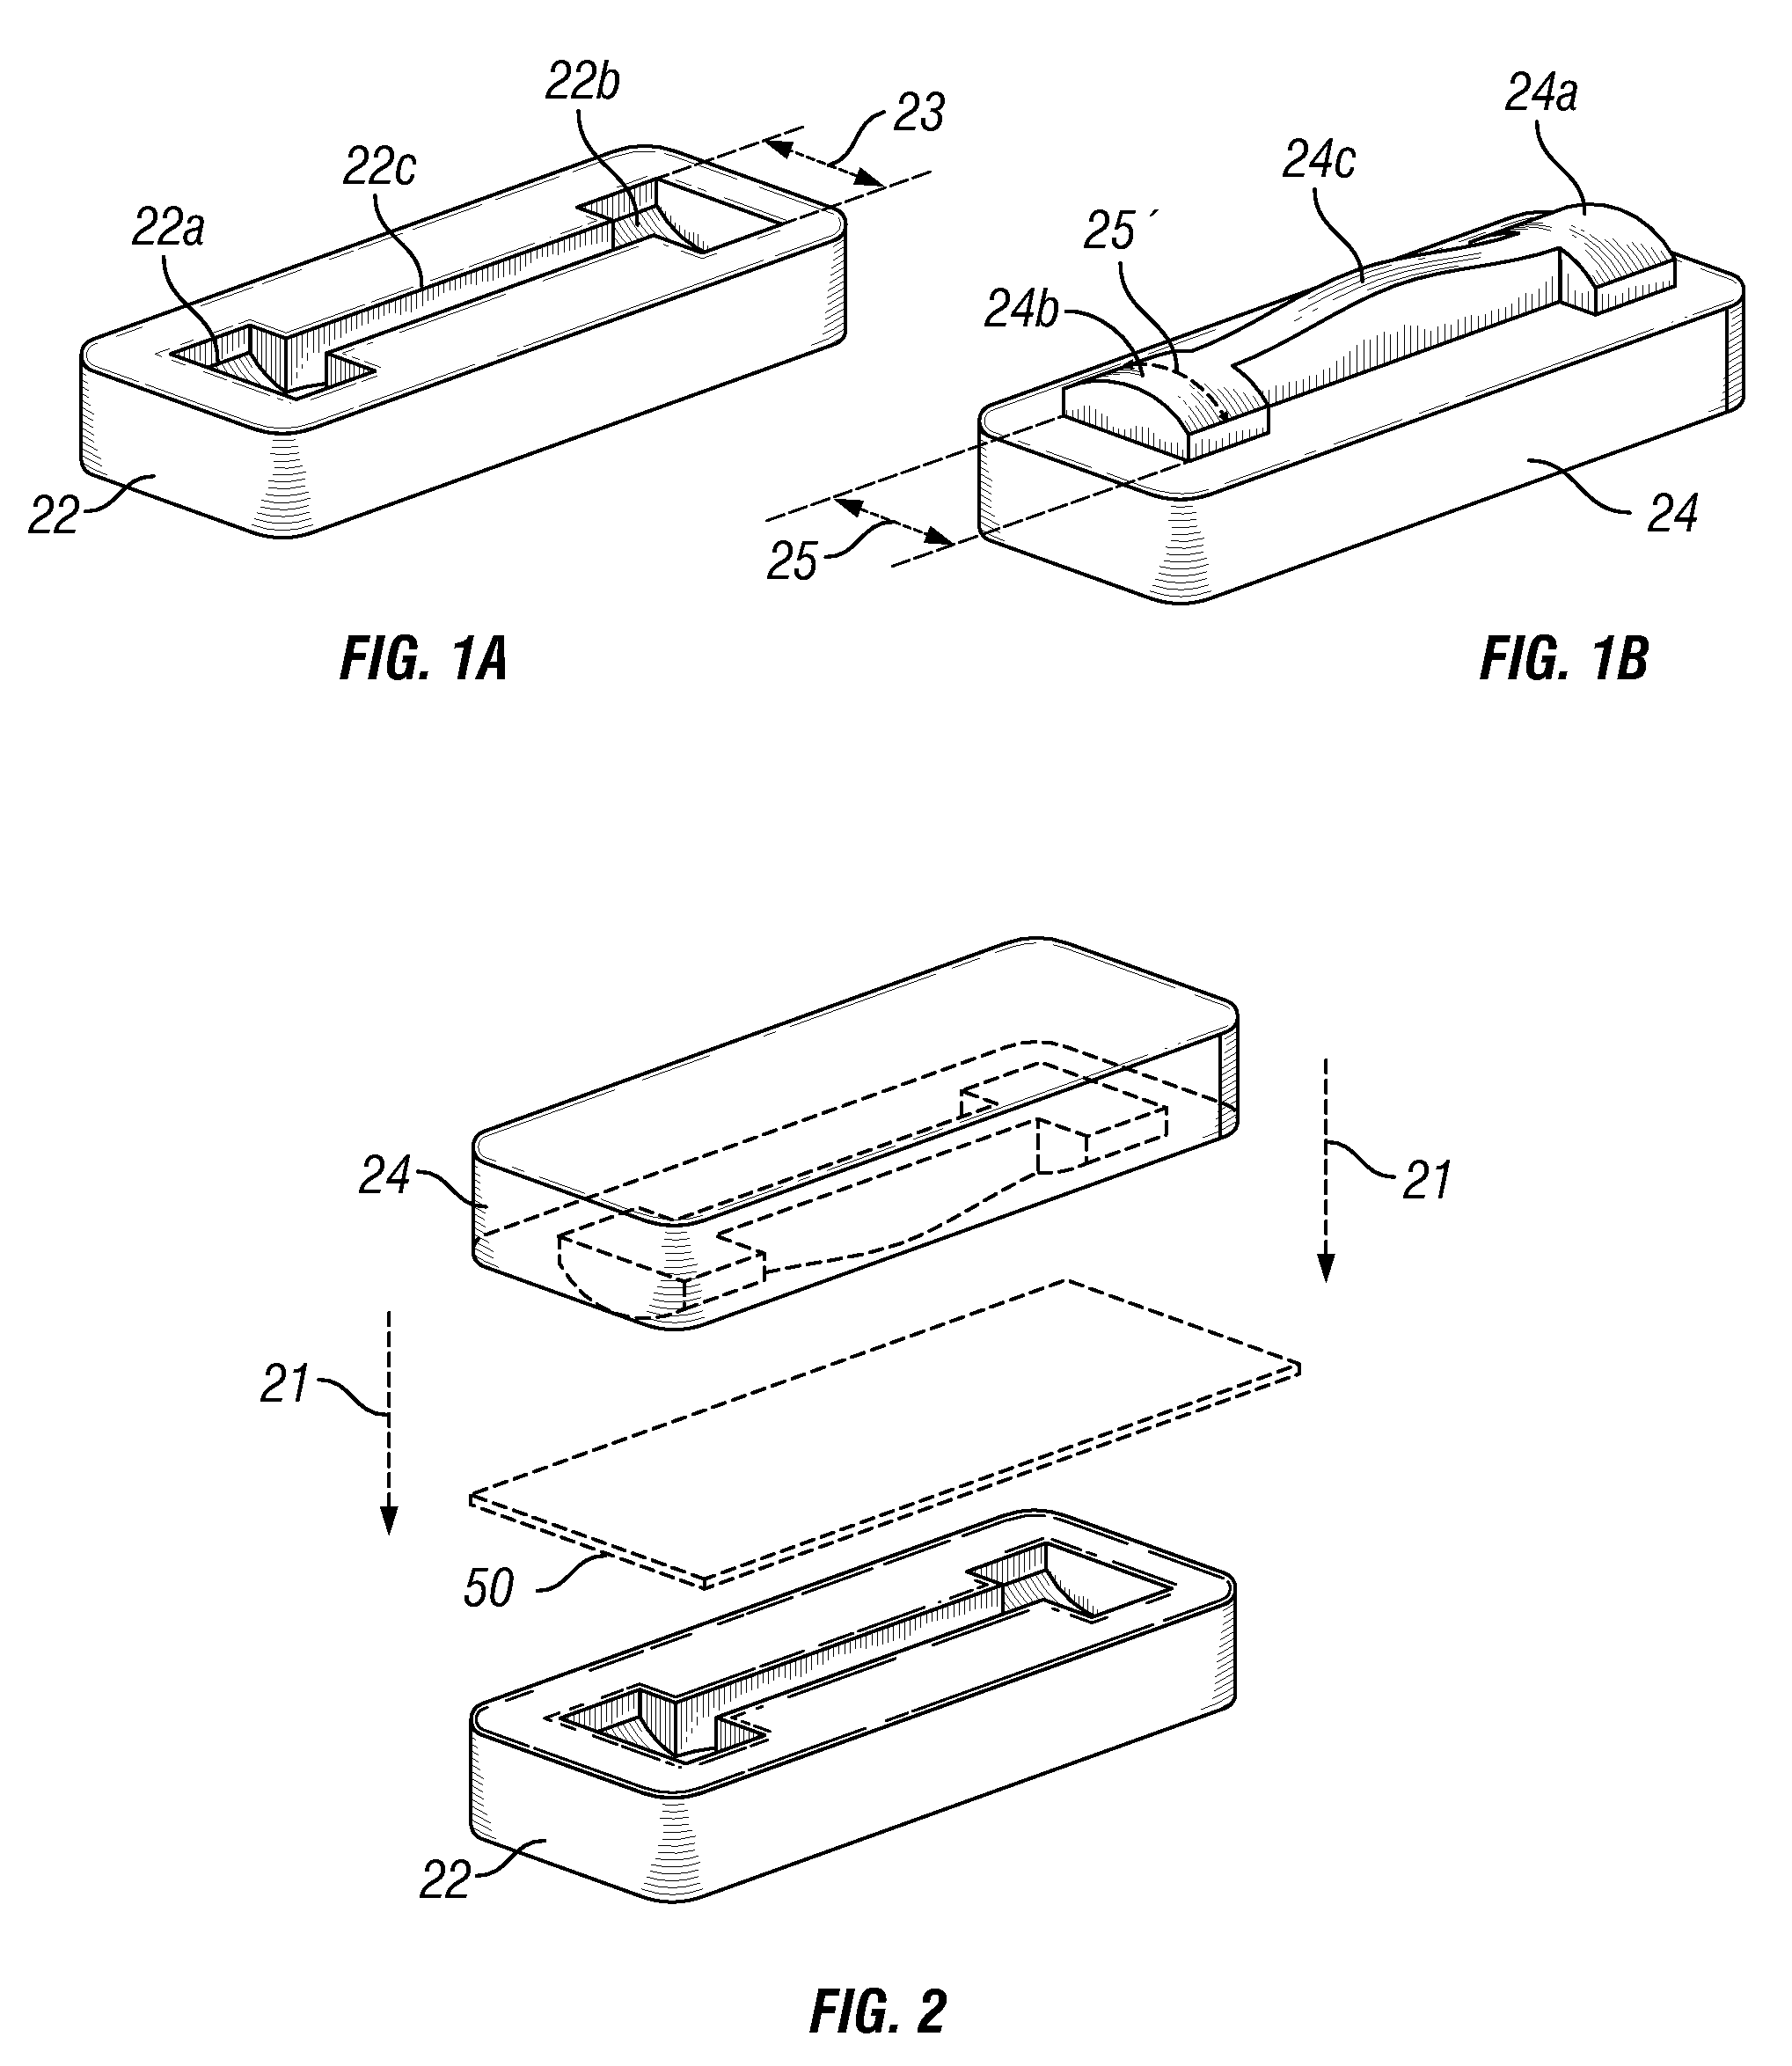 Modular Low-Clearance Centralizer and Method of Making Modular Low-Clearance Centralizer